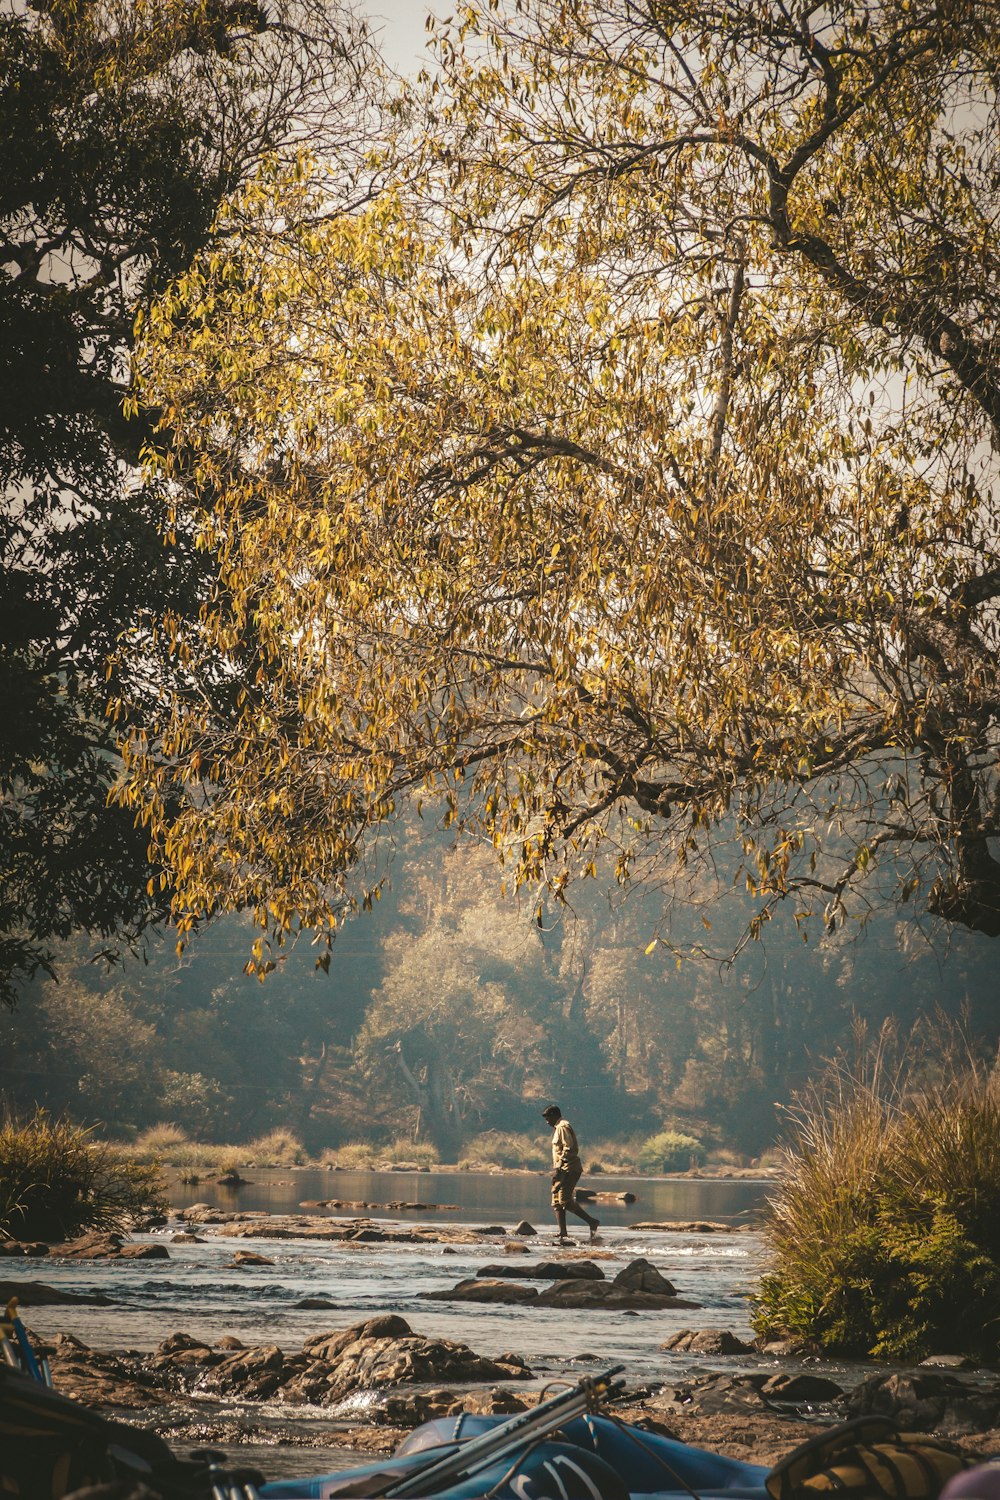 a man fishing in a river surrounded by trees